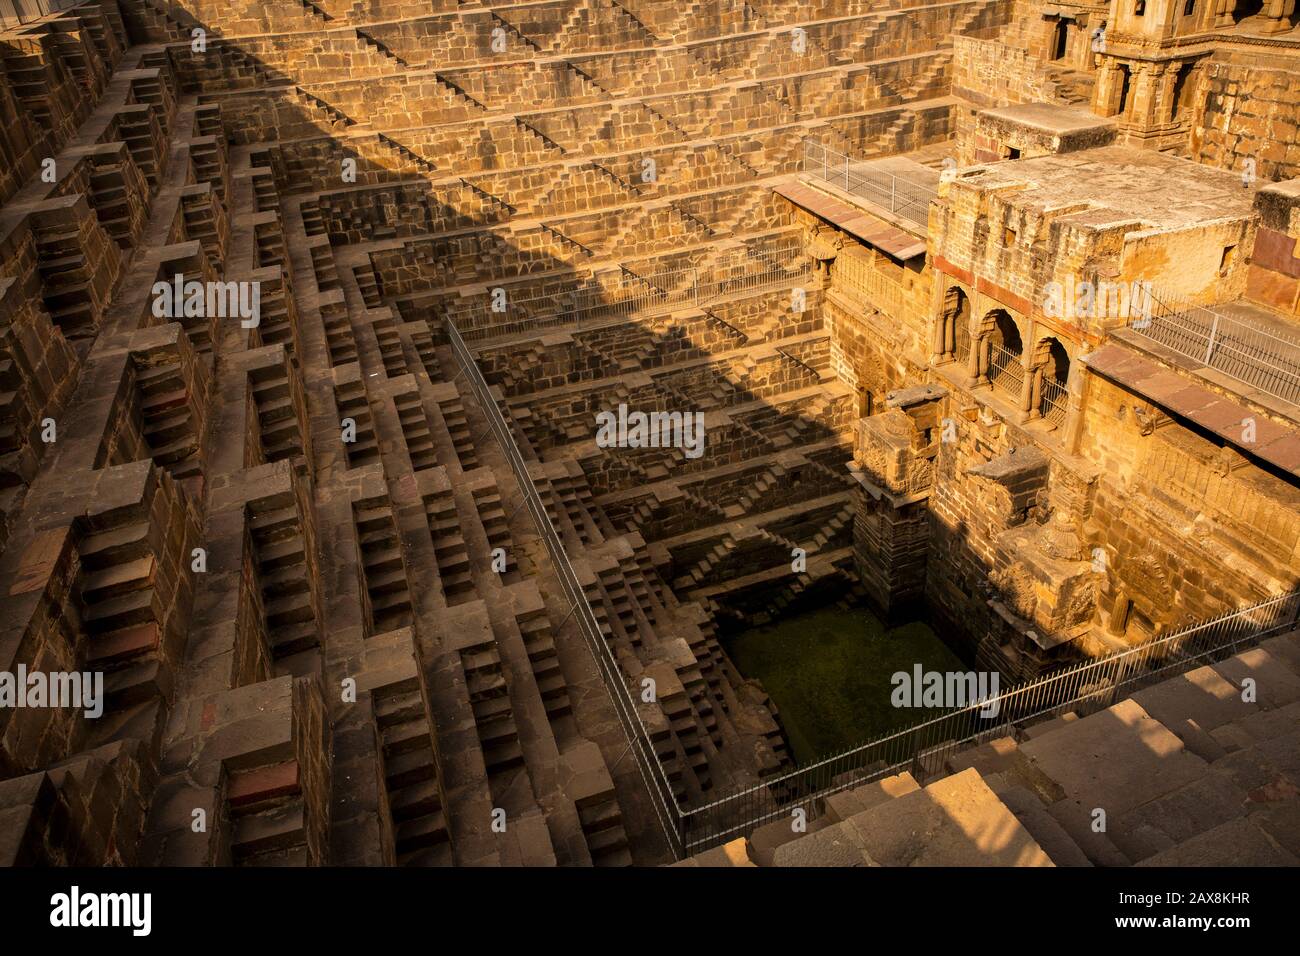 India, Rajasthan, Abhaneri, Chand Baori Stepwell, originating from 8th-9th centuries, view down to water Stock Photo